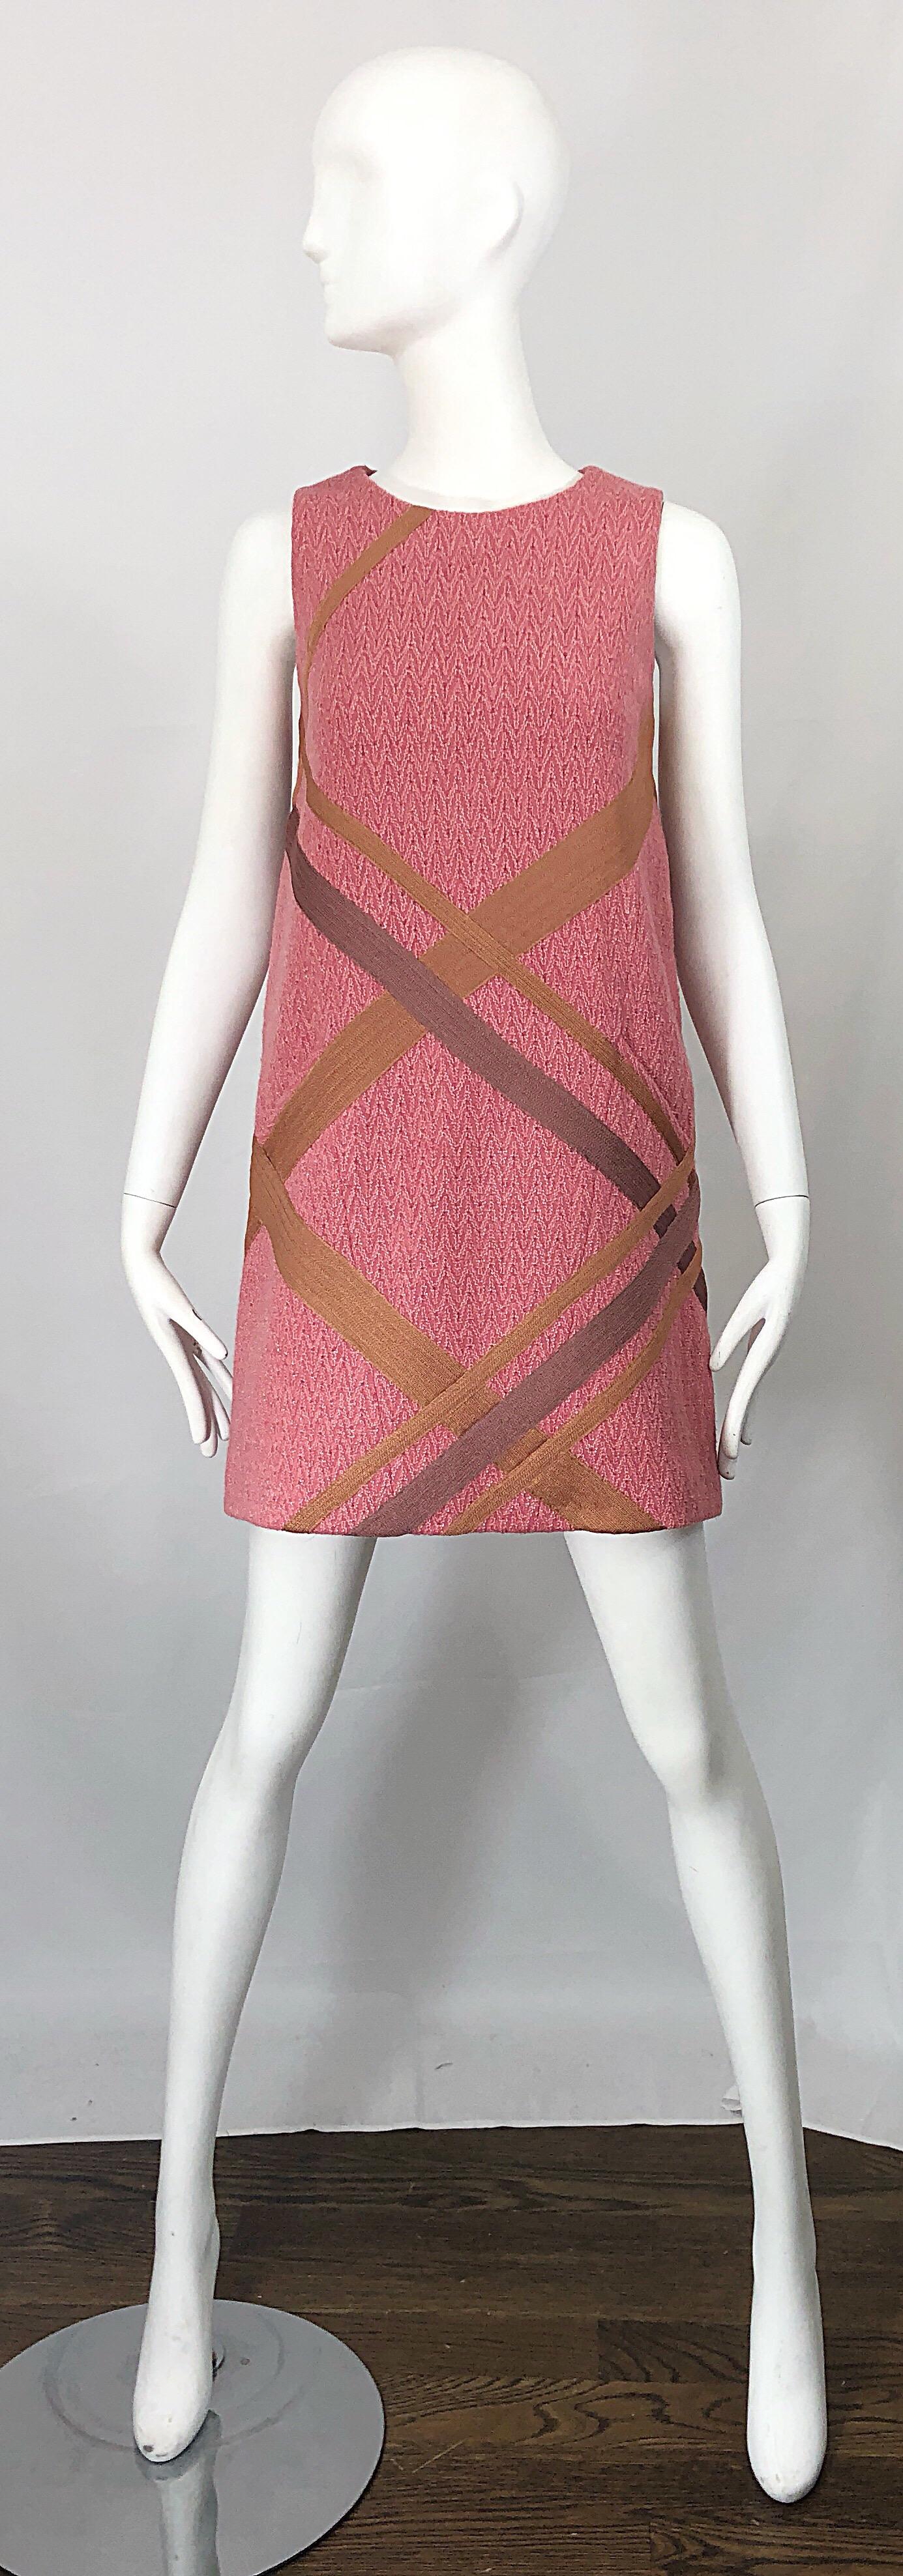 Chic vintage 90s does 60s MISSONI Orange Label mod bubblegum pink and tan shift dress! Features a pink backdrop, with a discreet chevron print. Flattering tan stripes thorughout. POCKET at left waist. Soft lightweight wool (70%), rayon (22%), and